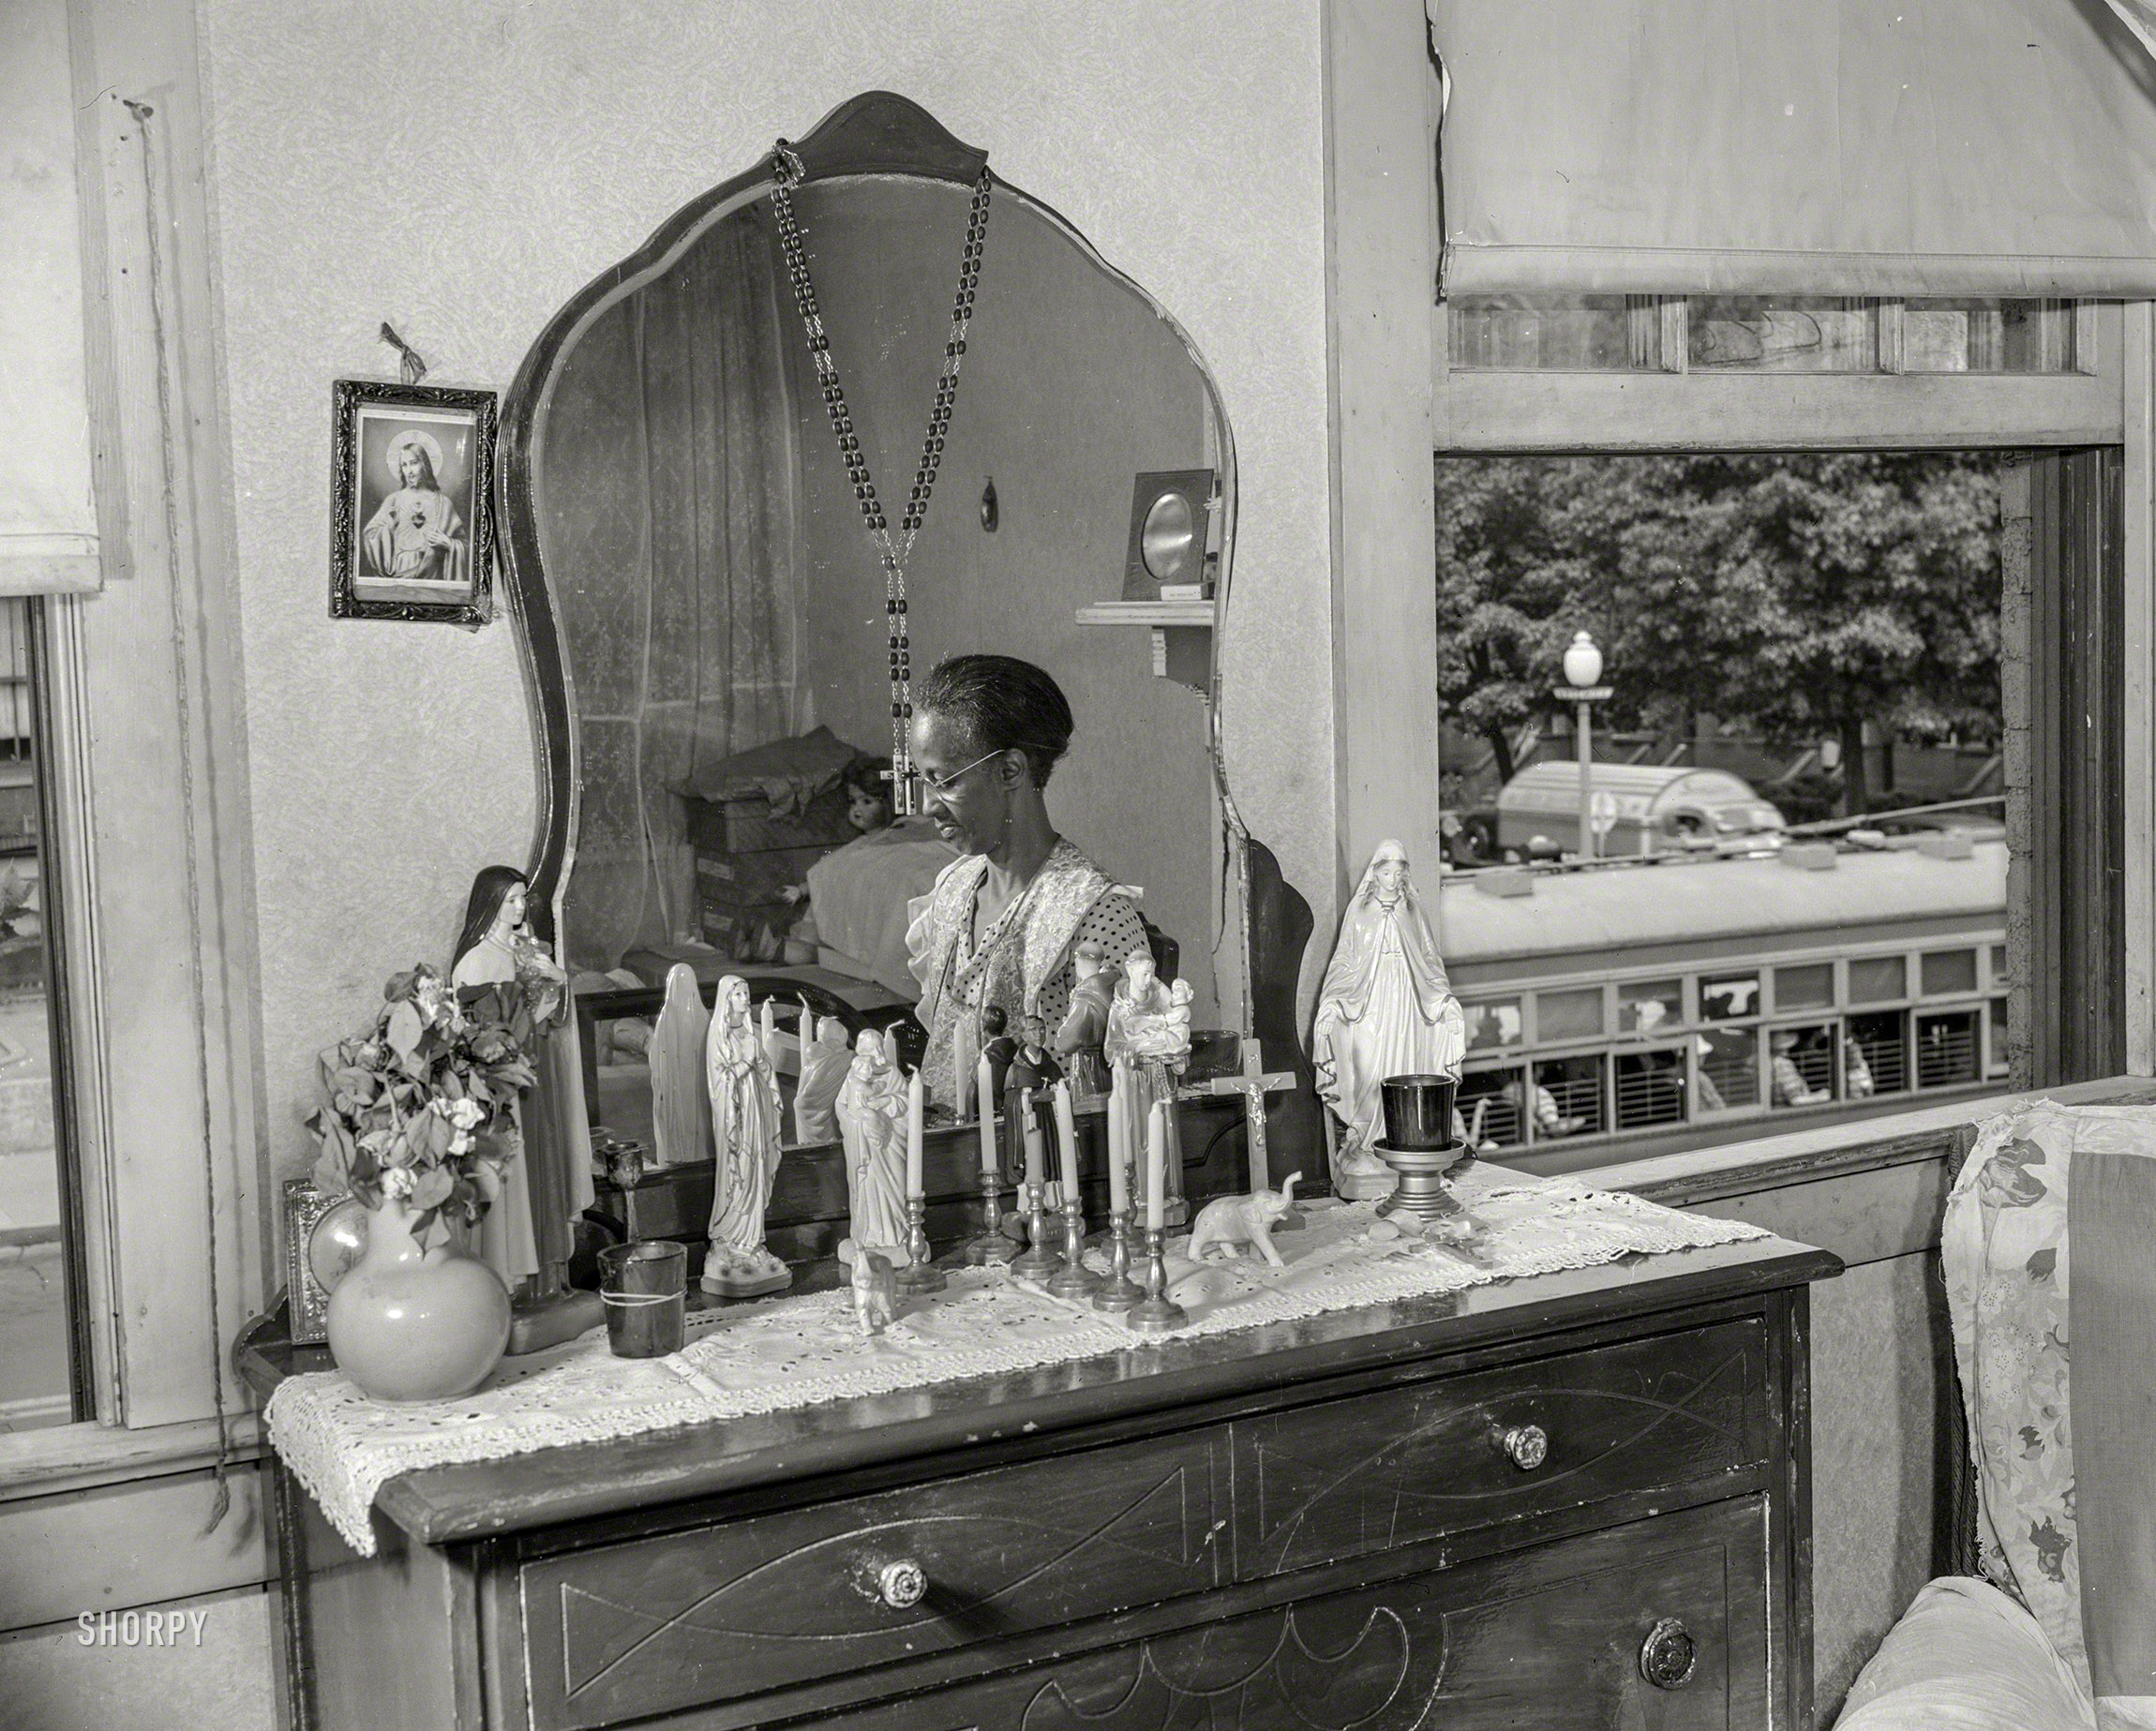 August 1942. "Mrs. Ella Watson, a government charwoman for 26 years who supports adopted daughter as well as daughter and three grandchildren on an annual salary of $1,080, reading the Bible in her bedroom." 4x5 inch acetate negative by Gordon Parks for the Office of War Information. View full size.